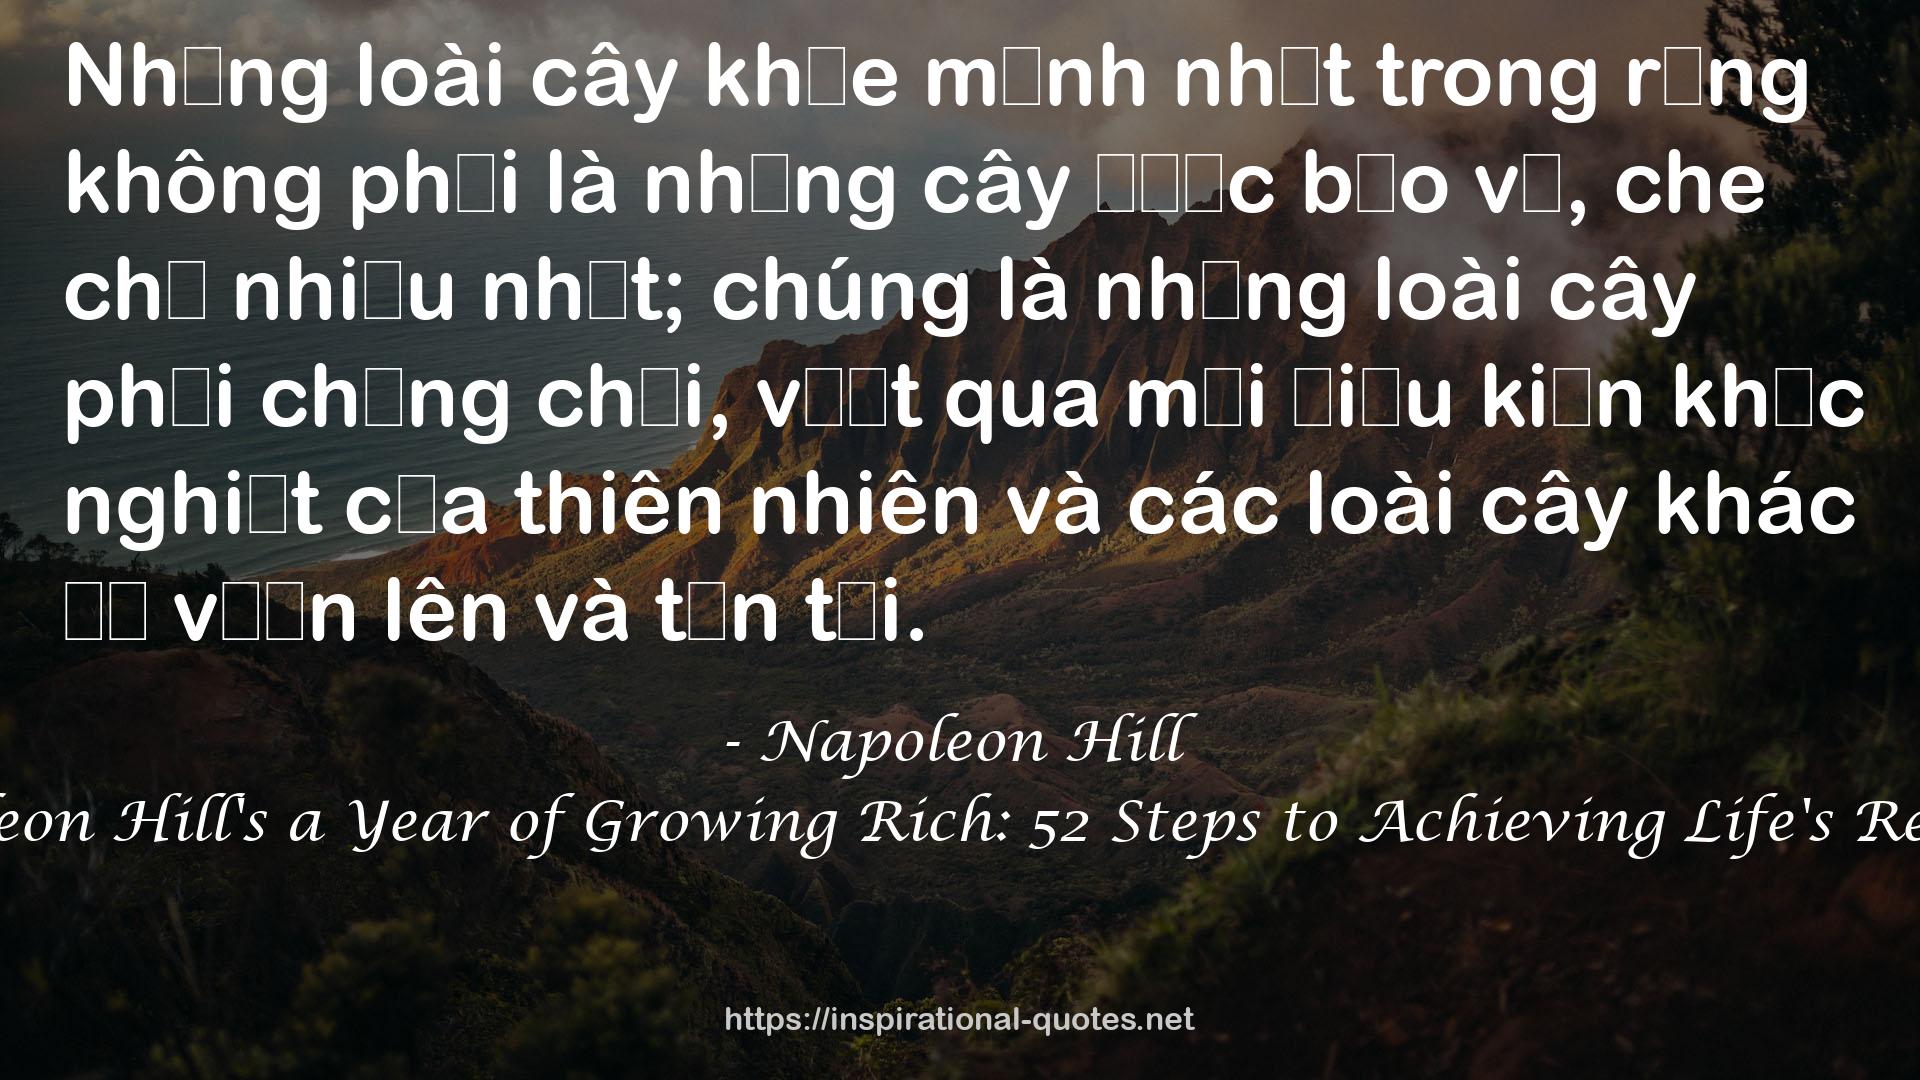 Napoleon Hill's a Year of Growing Rich: 52 Steps to Achieving Life's Rewards QUOTES